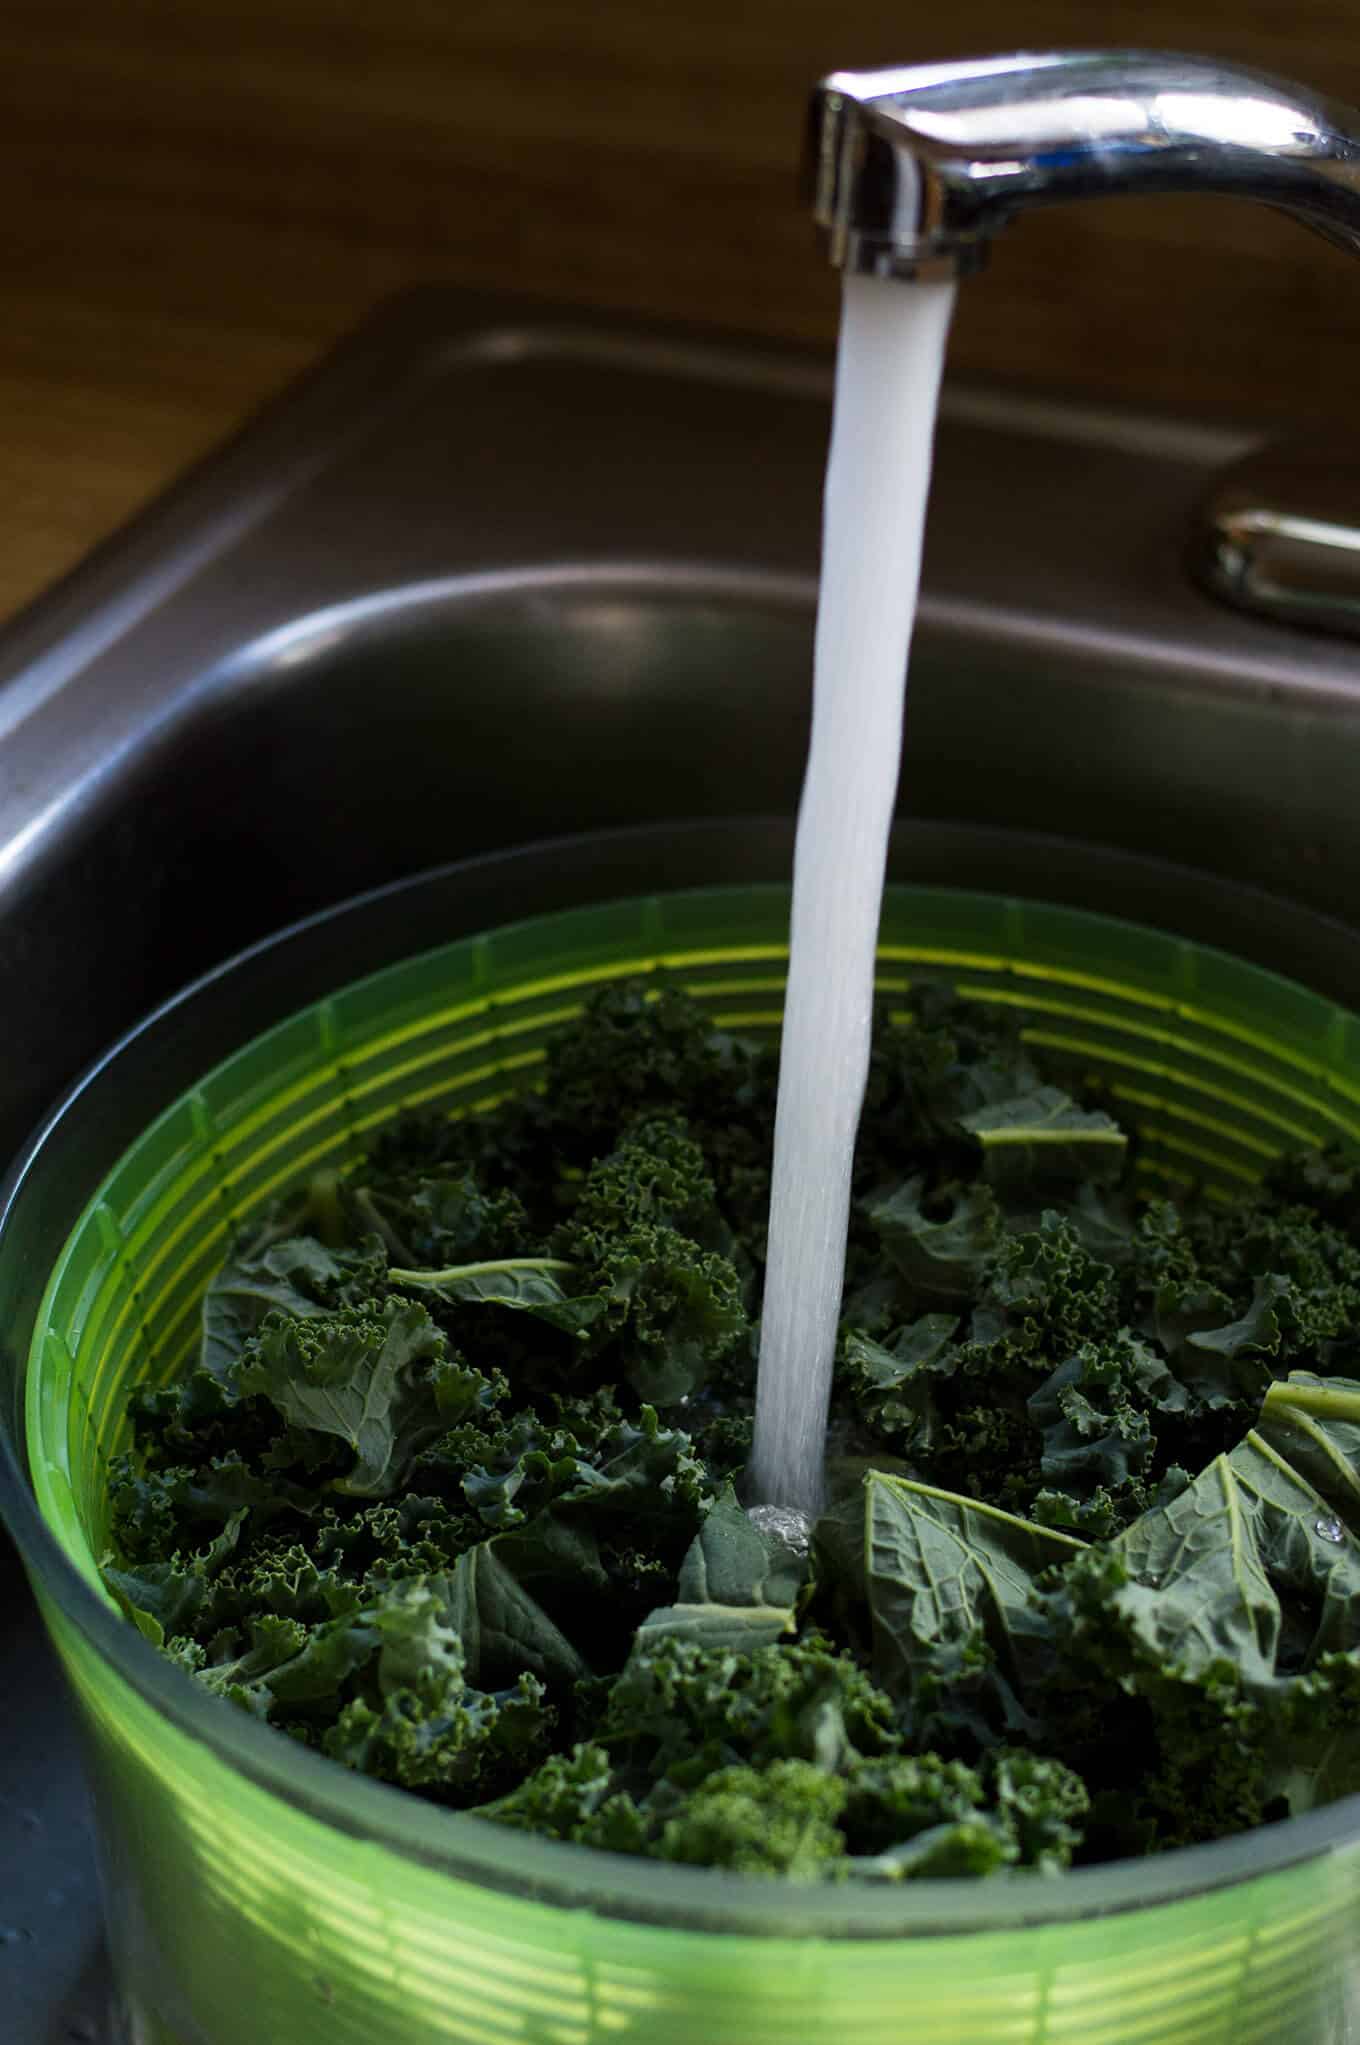 Kale in a salad spinner under a running faucet.